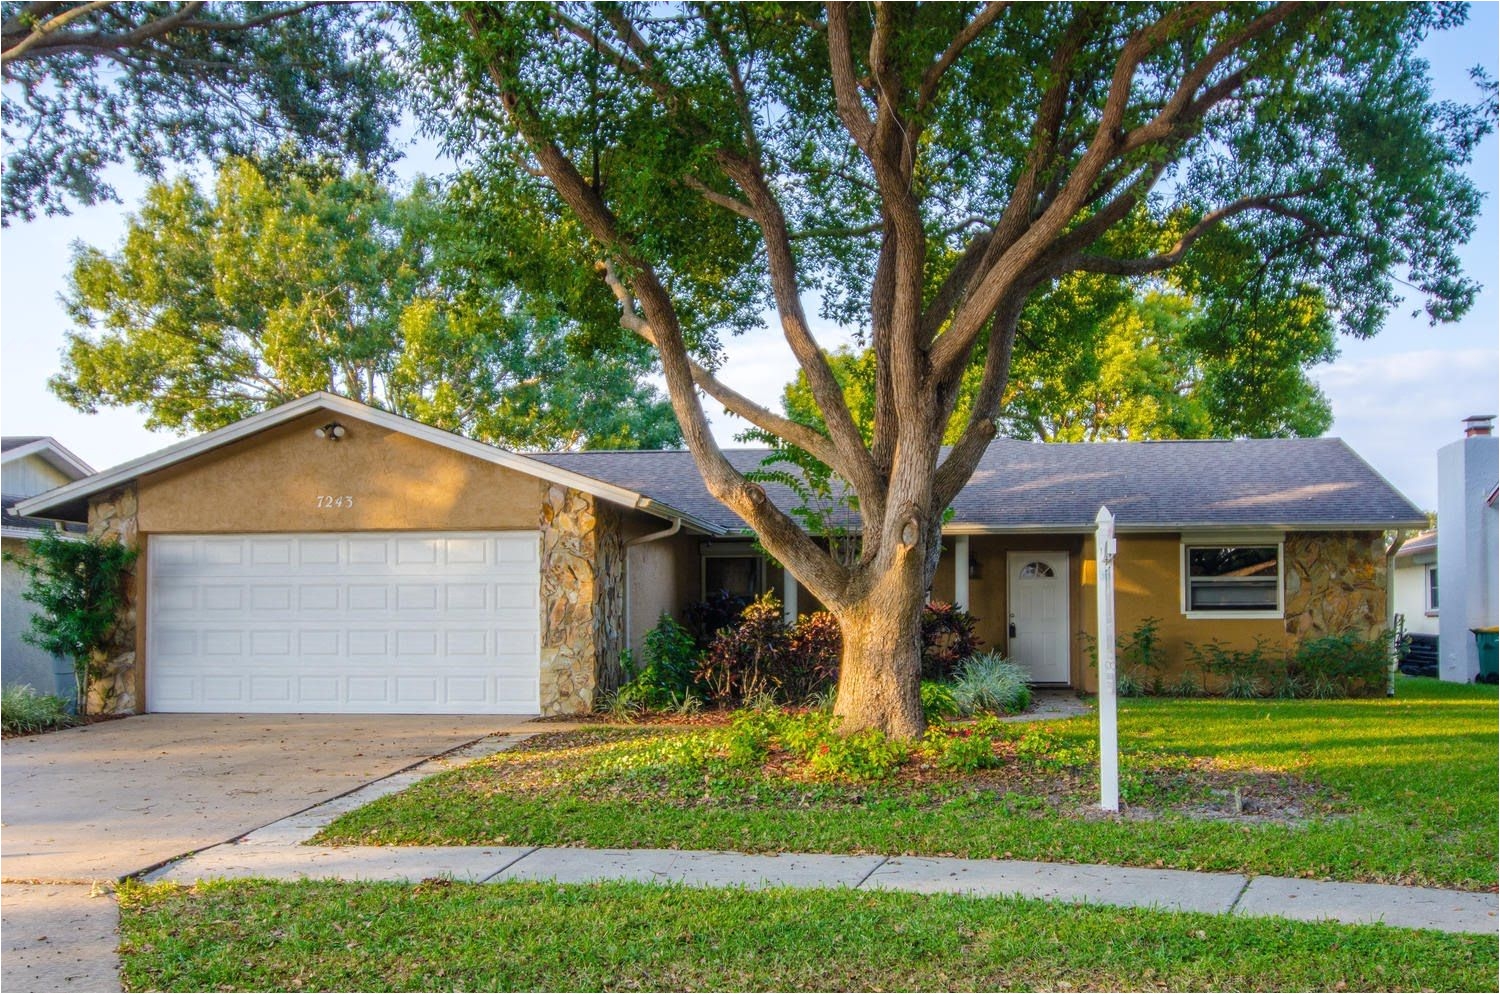 explore homes for sales country and more home for sale 335000 7243 57th ave north st petersburg fl 33709